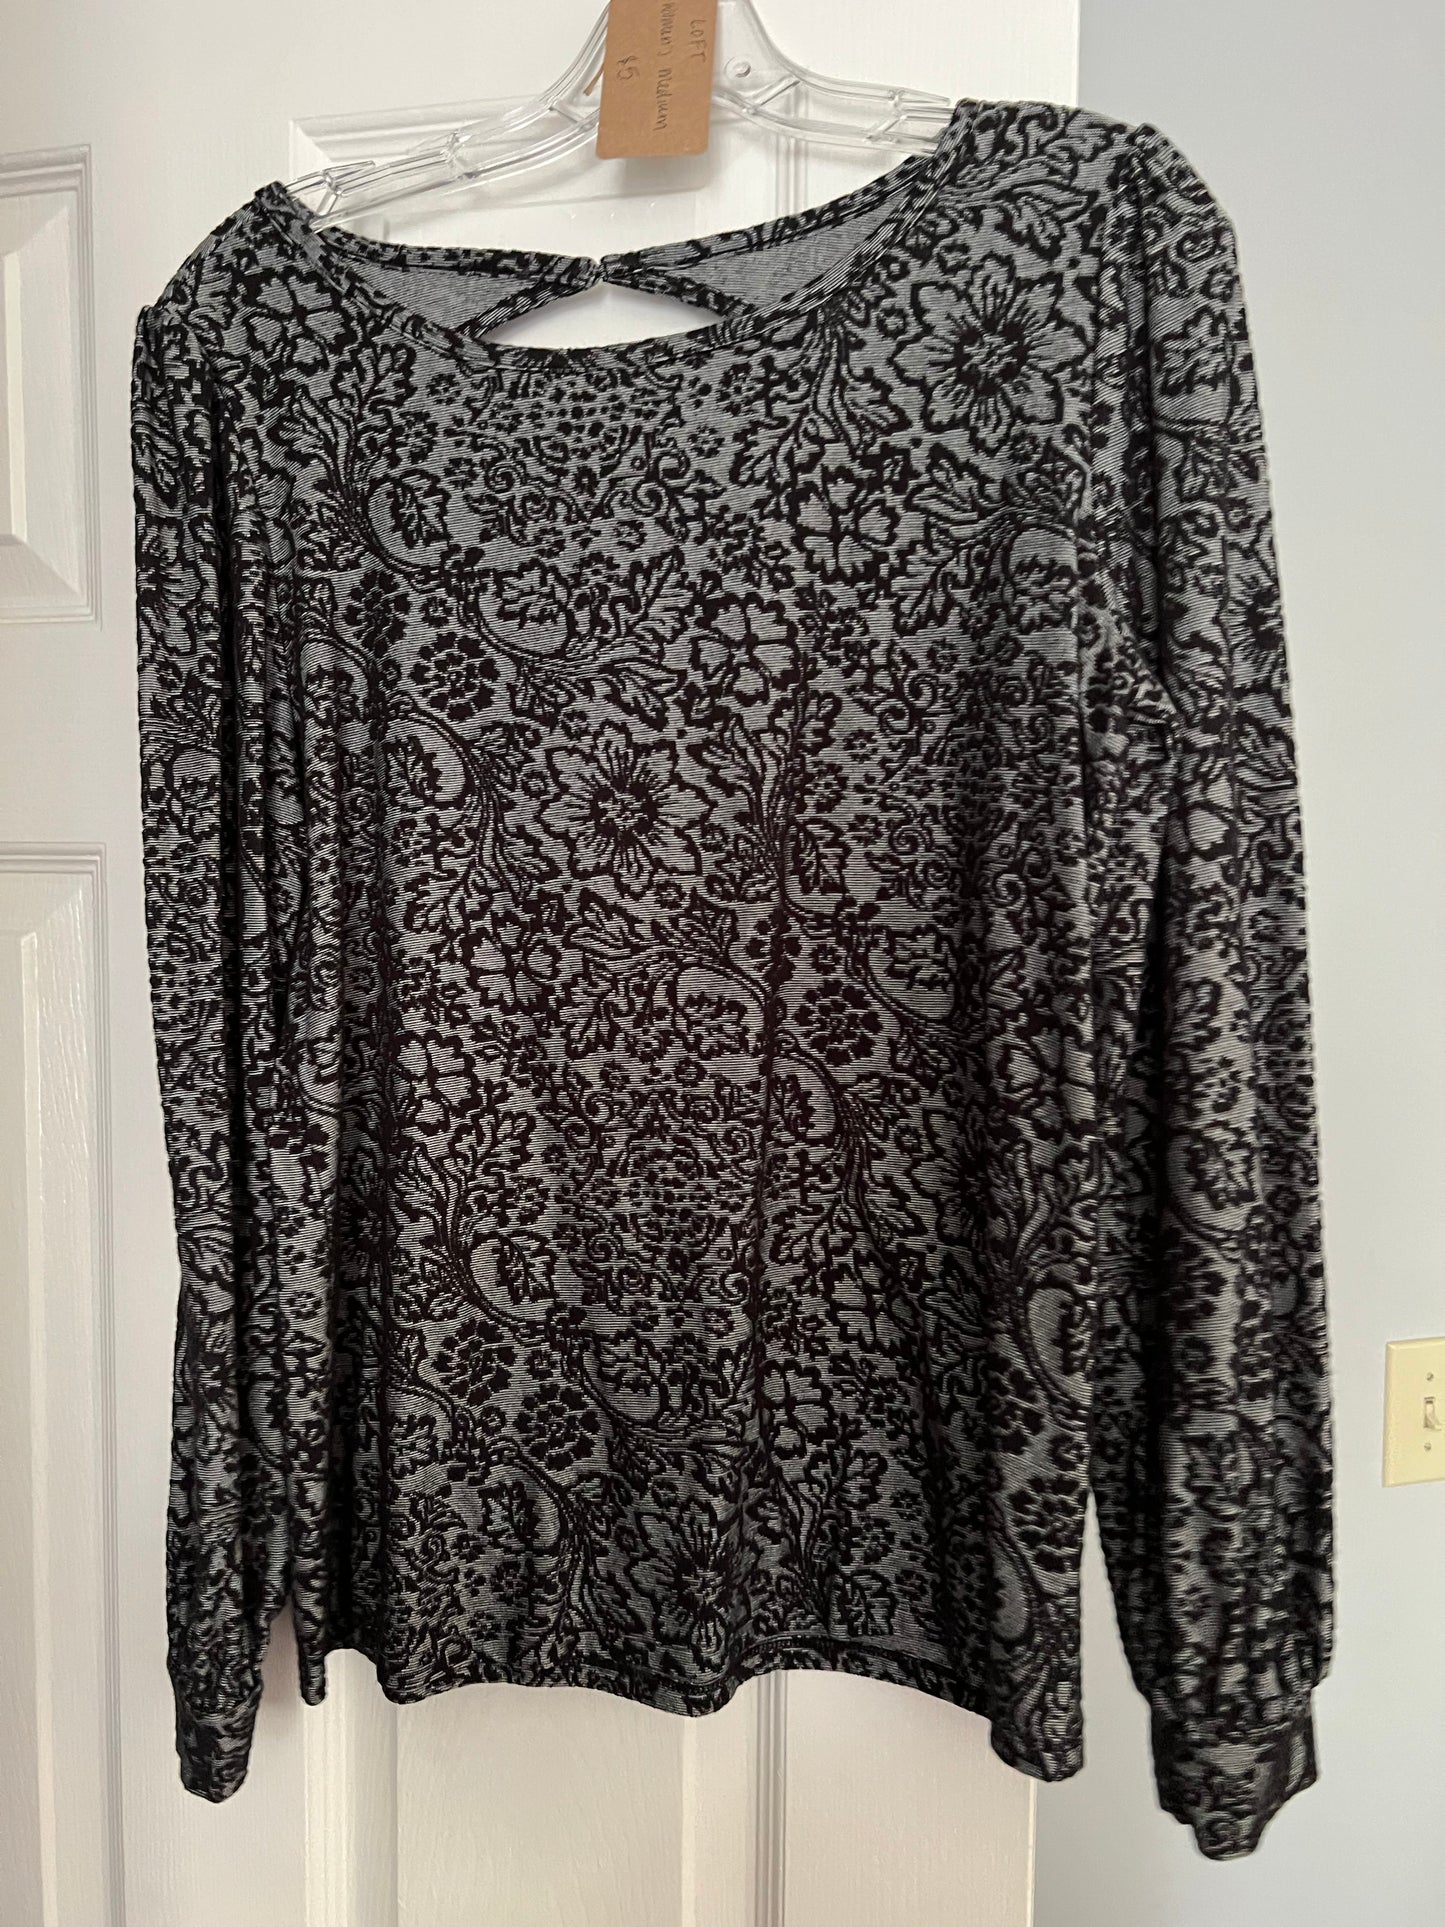 **REDUCED** LOFT Women's Black and Gray Blouse Size M